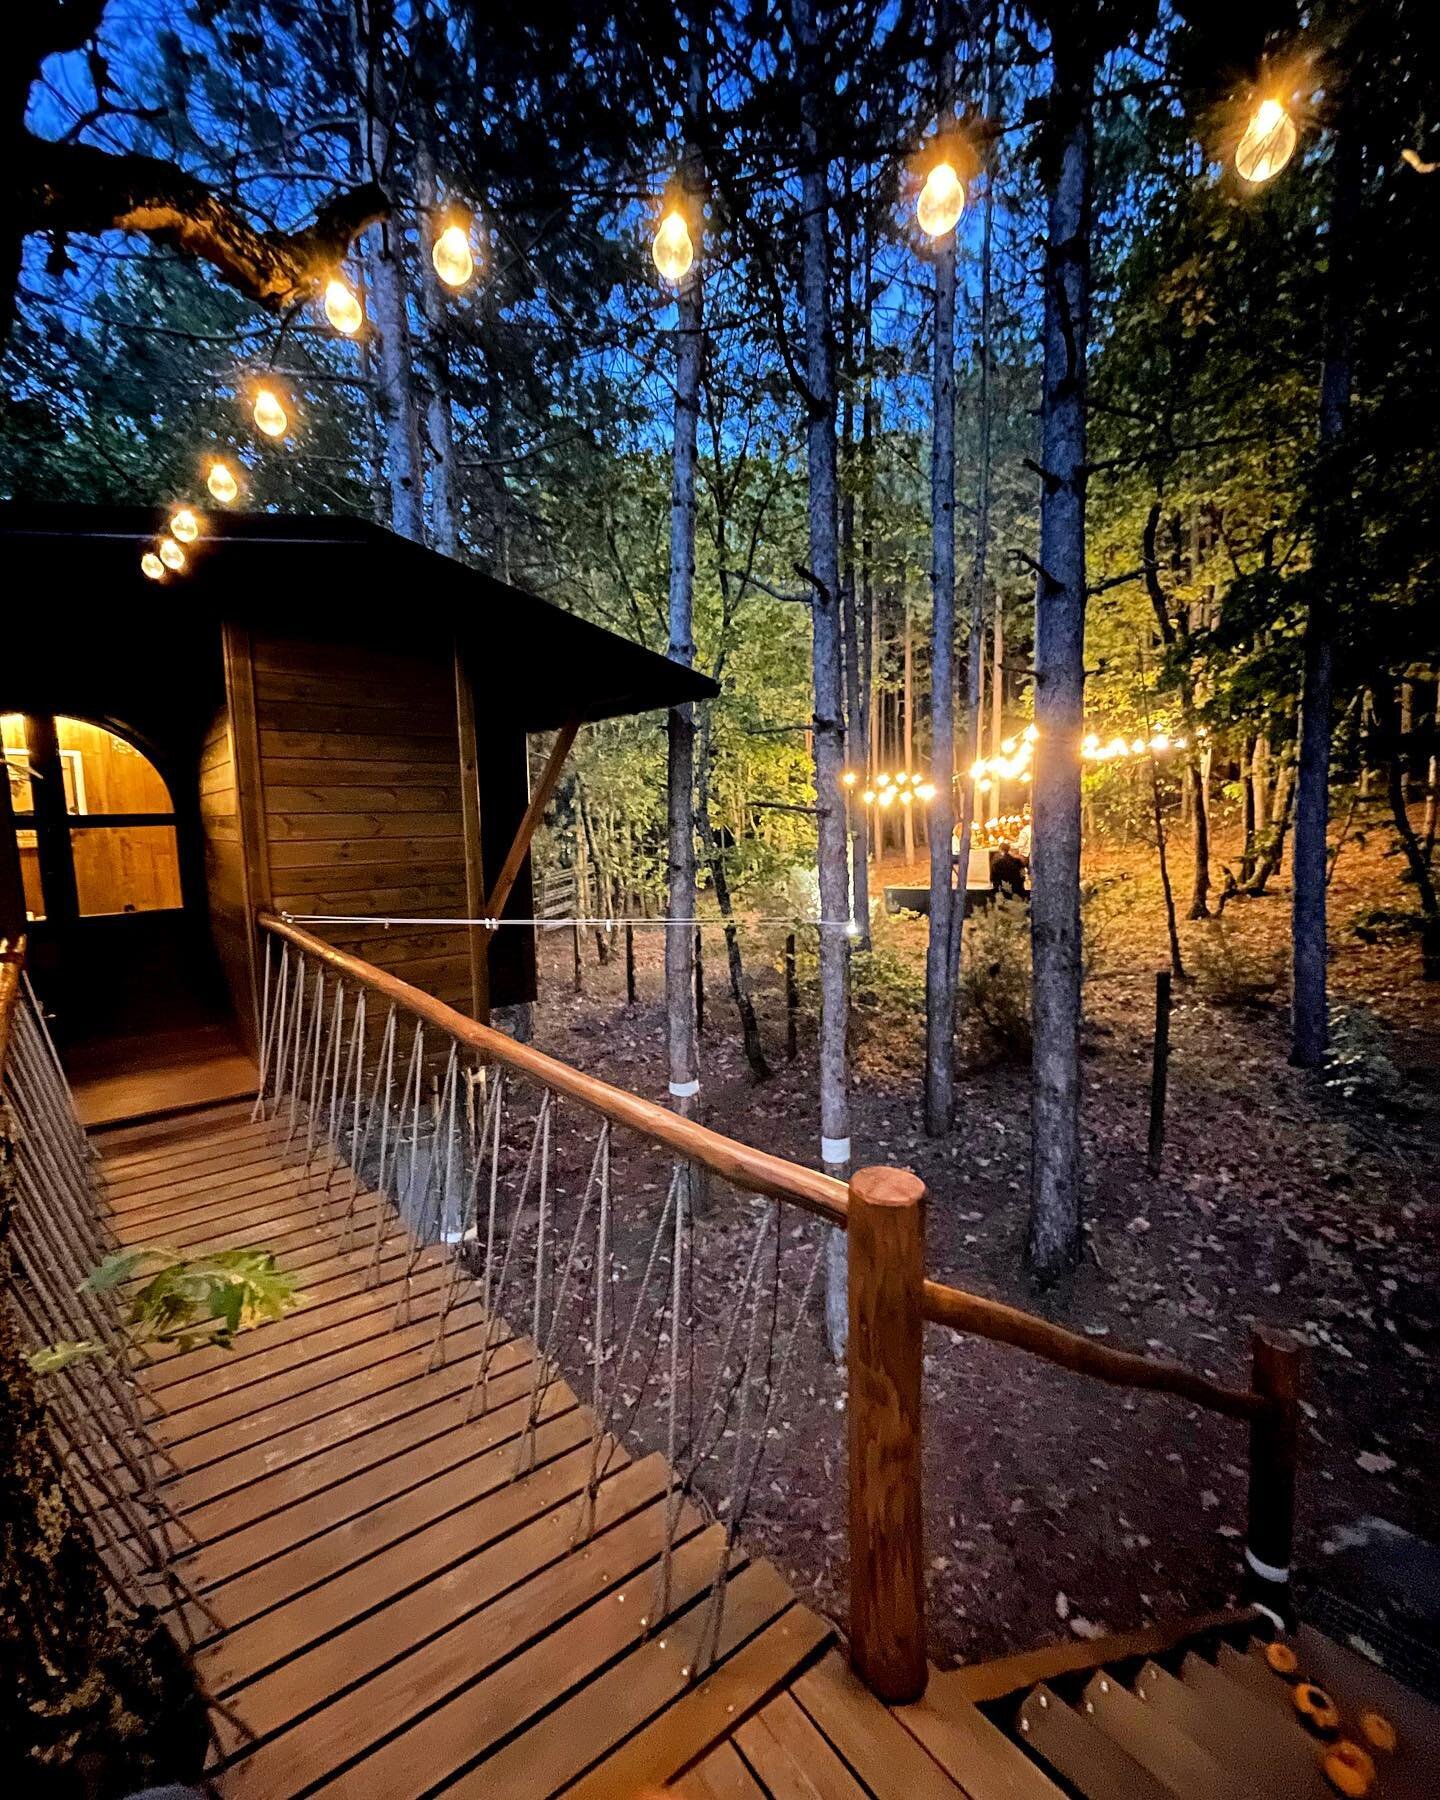 &bull; Experience the outdoors from a new perspective🌳

📍For bookings link in bio!
.
.
.
🎪 @fiorentino_lfs 
.
.
.
#agramada #agramadatreehouse #xaniagramada #agramadaexperiences #forest #uniquehotels #bestairbnb #glamping #weekendaway #naturelover